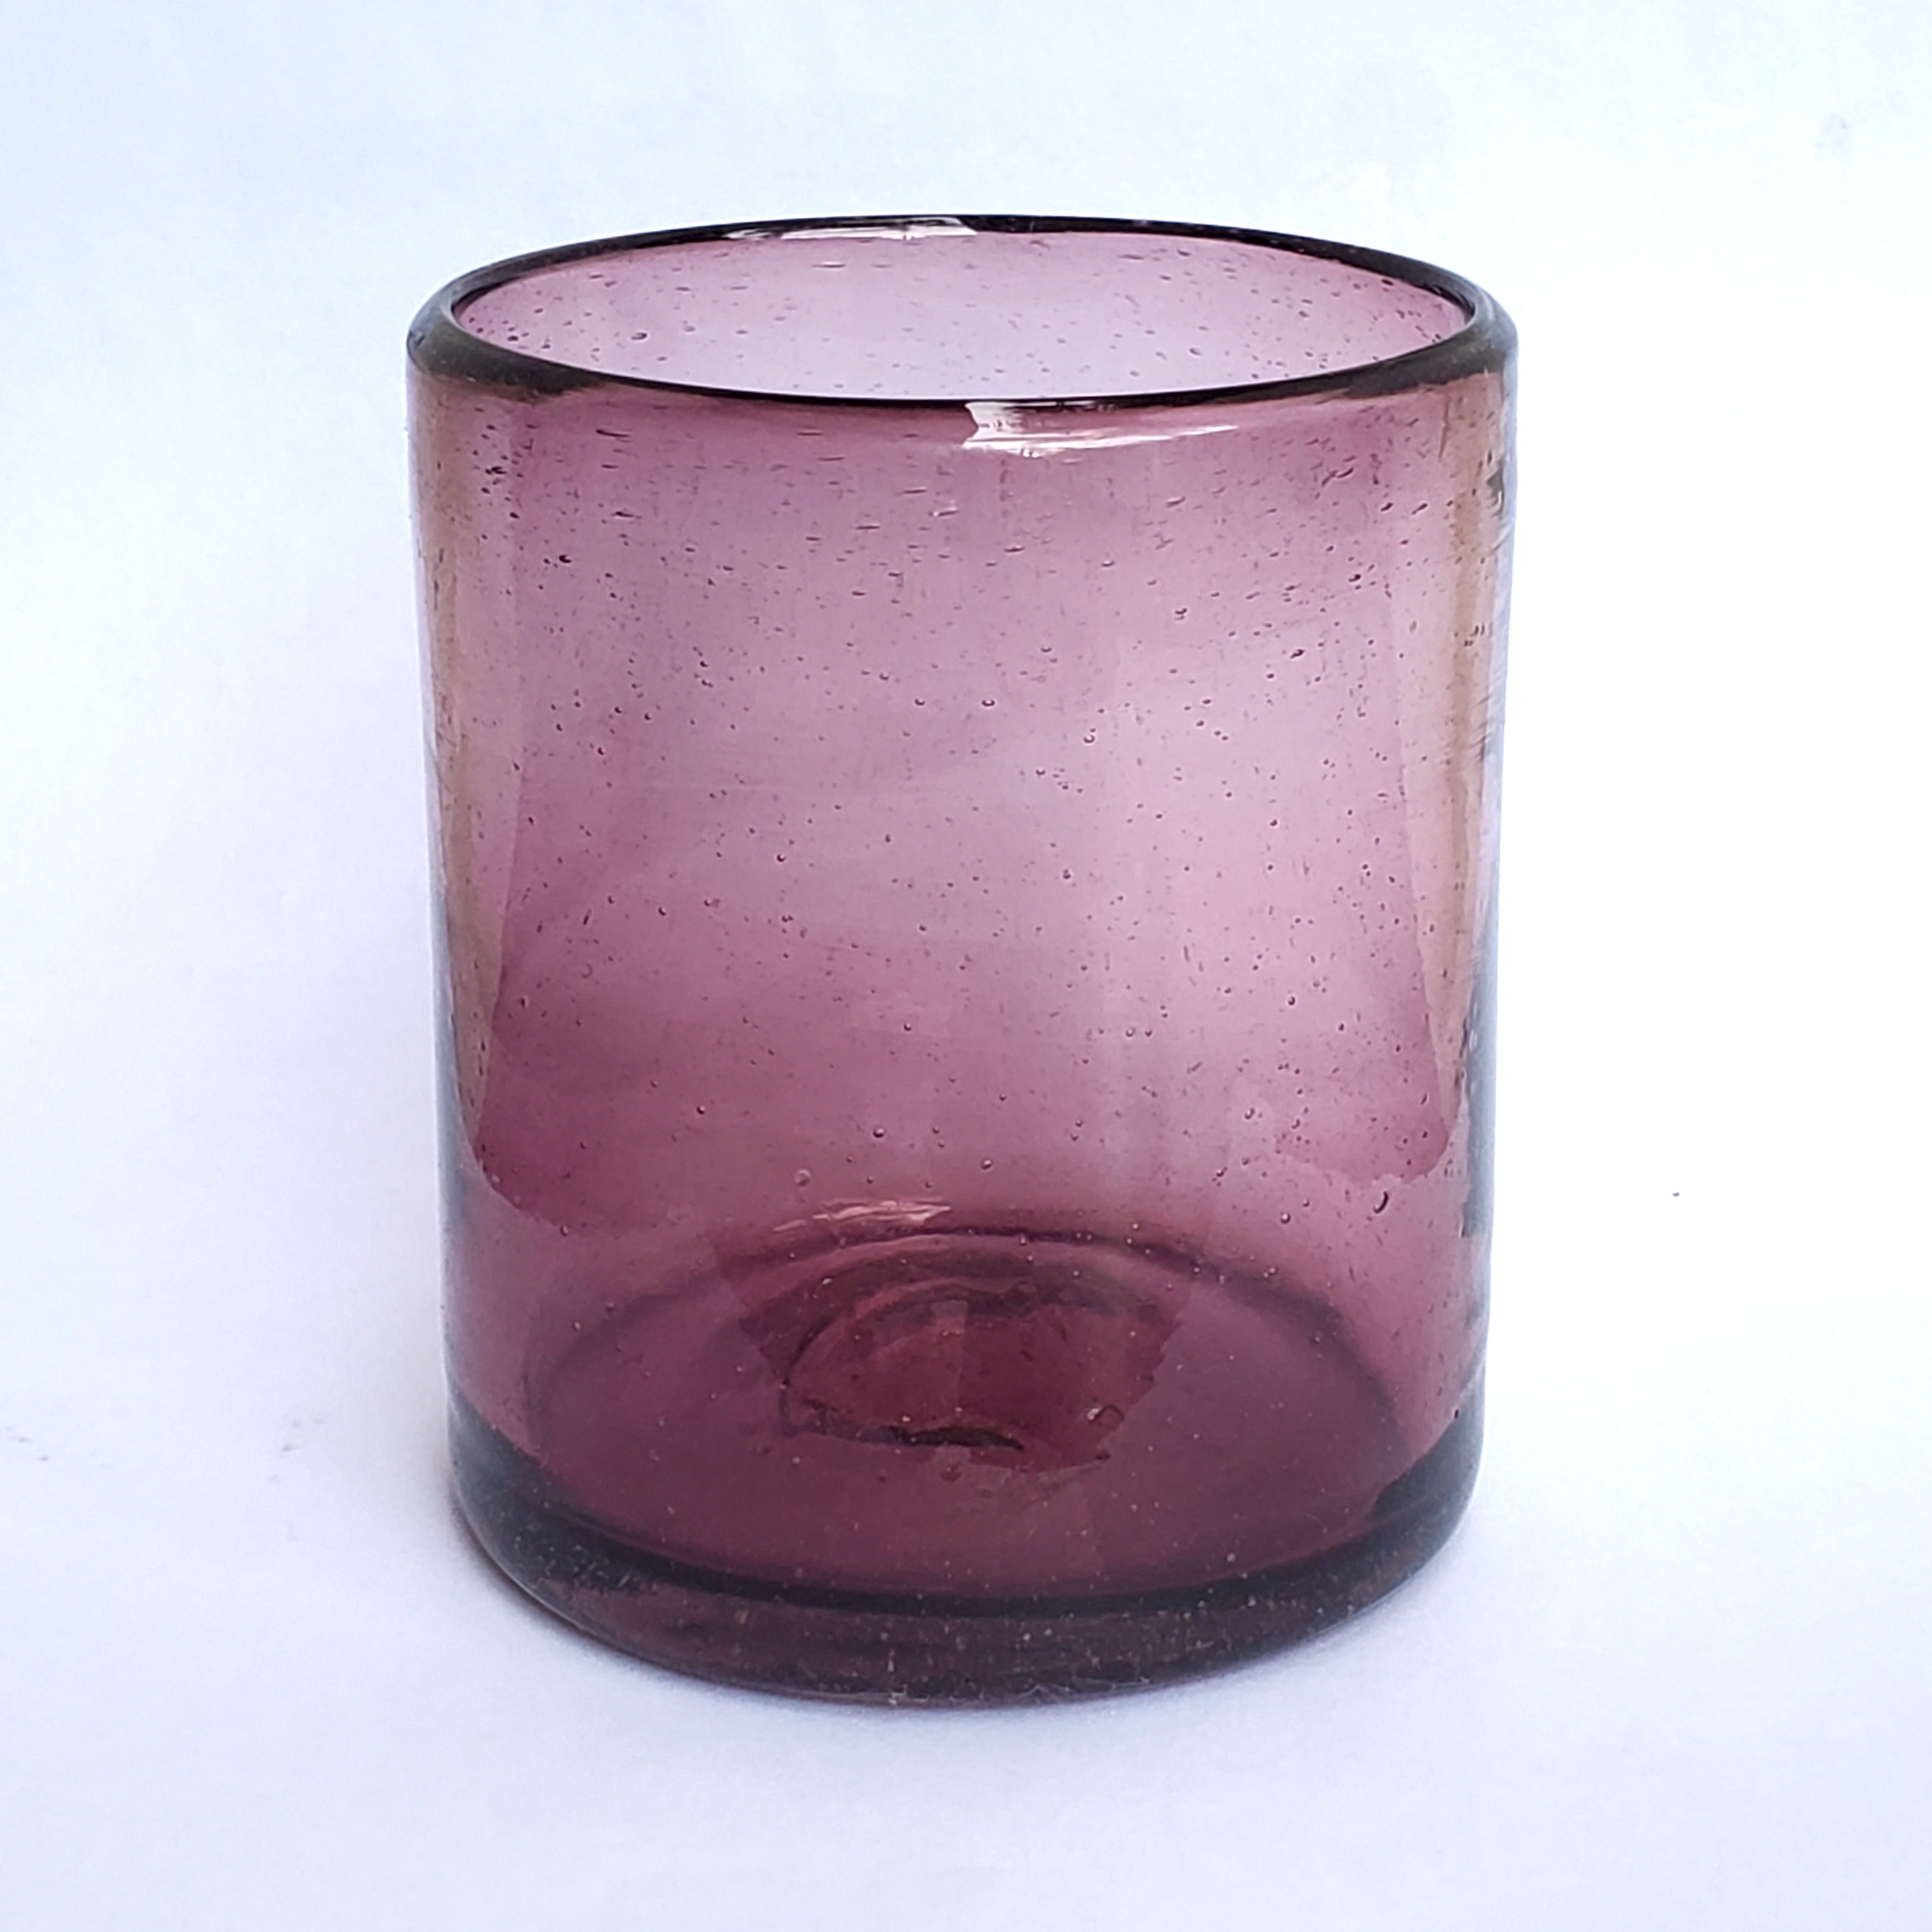 VIDRIO SOPLADO al Mayoreo / yst 9 oz Short Tumblers (set of 6) / Enhance your table setting with our beautiful Amethyst colored glasses.